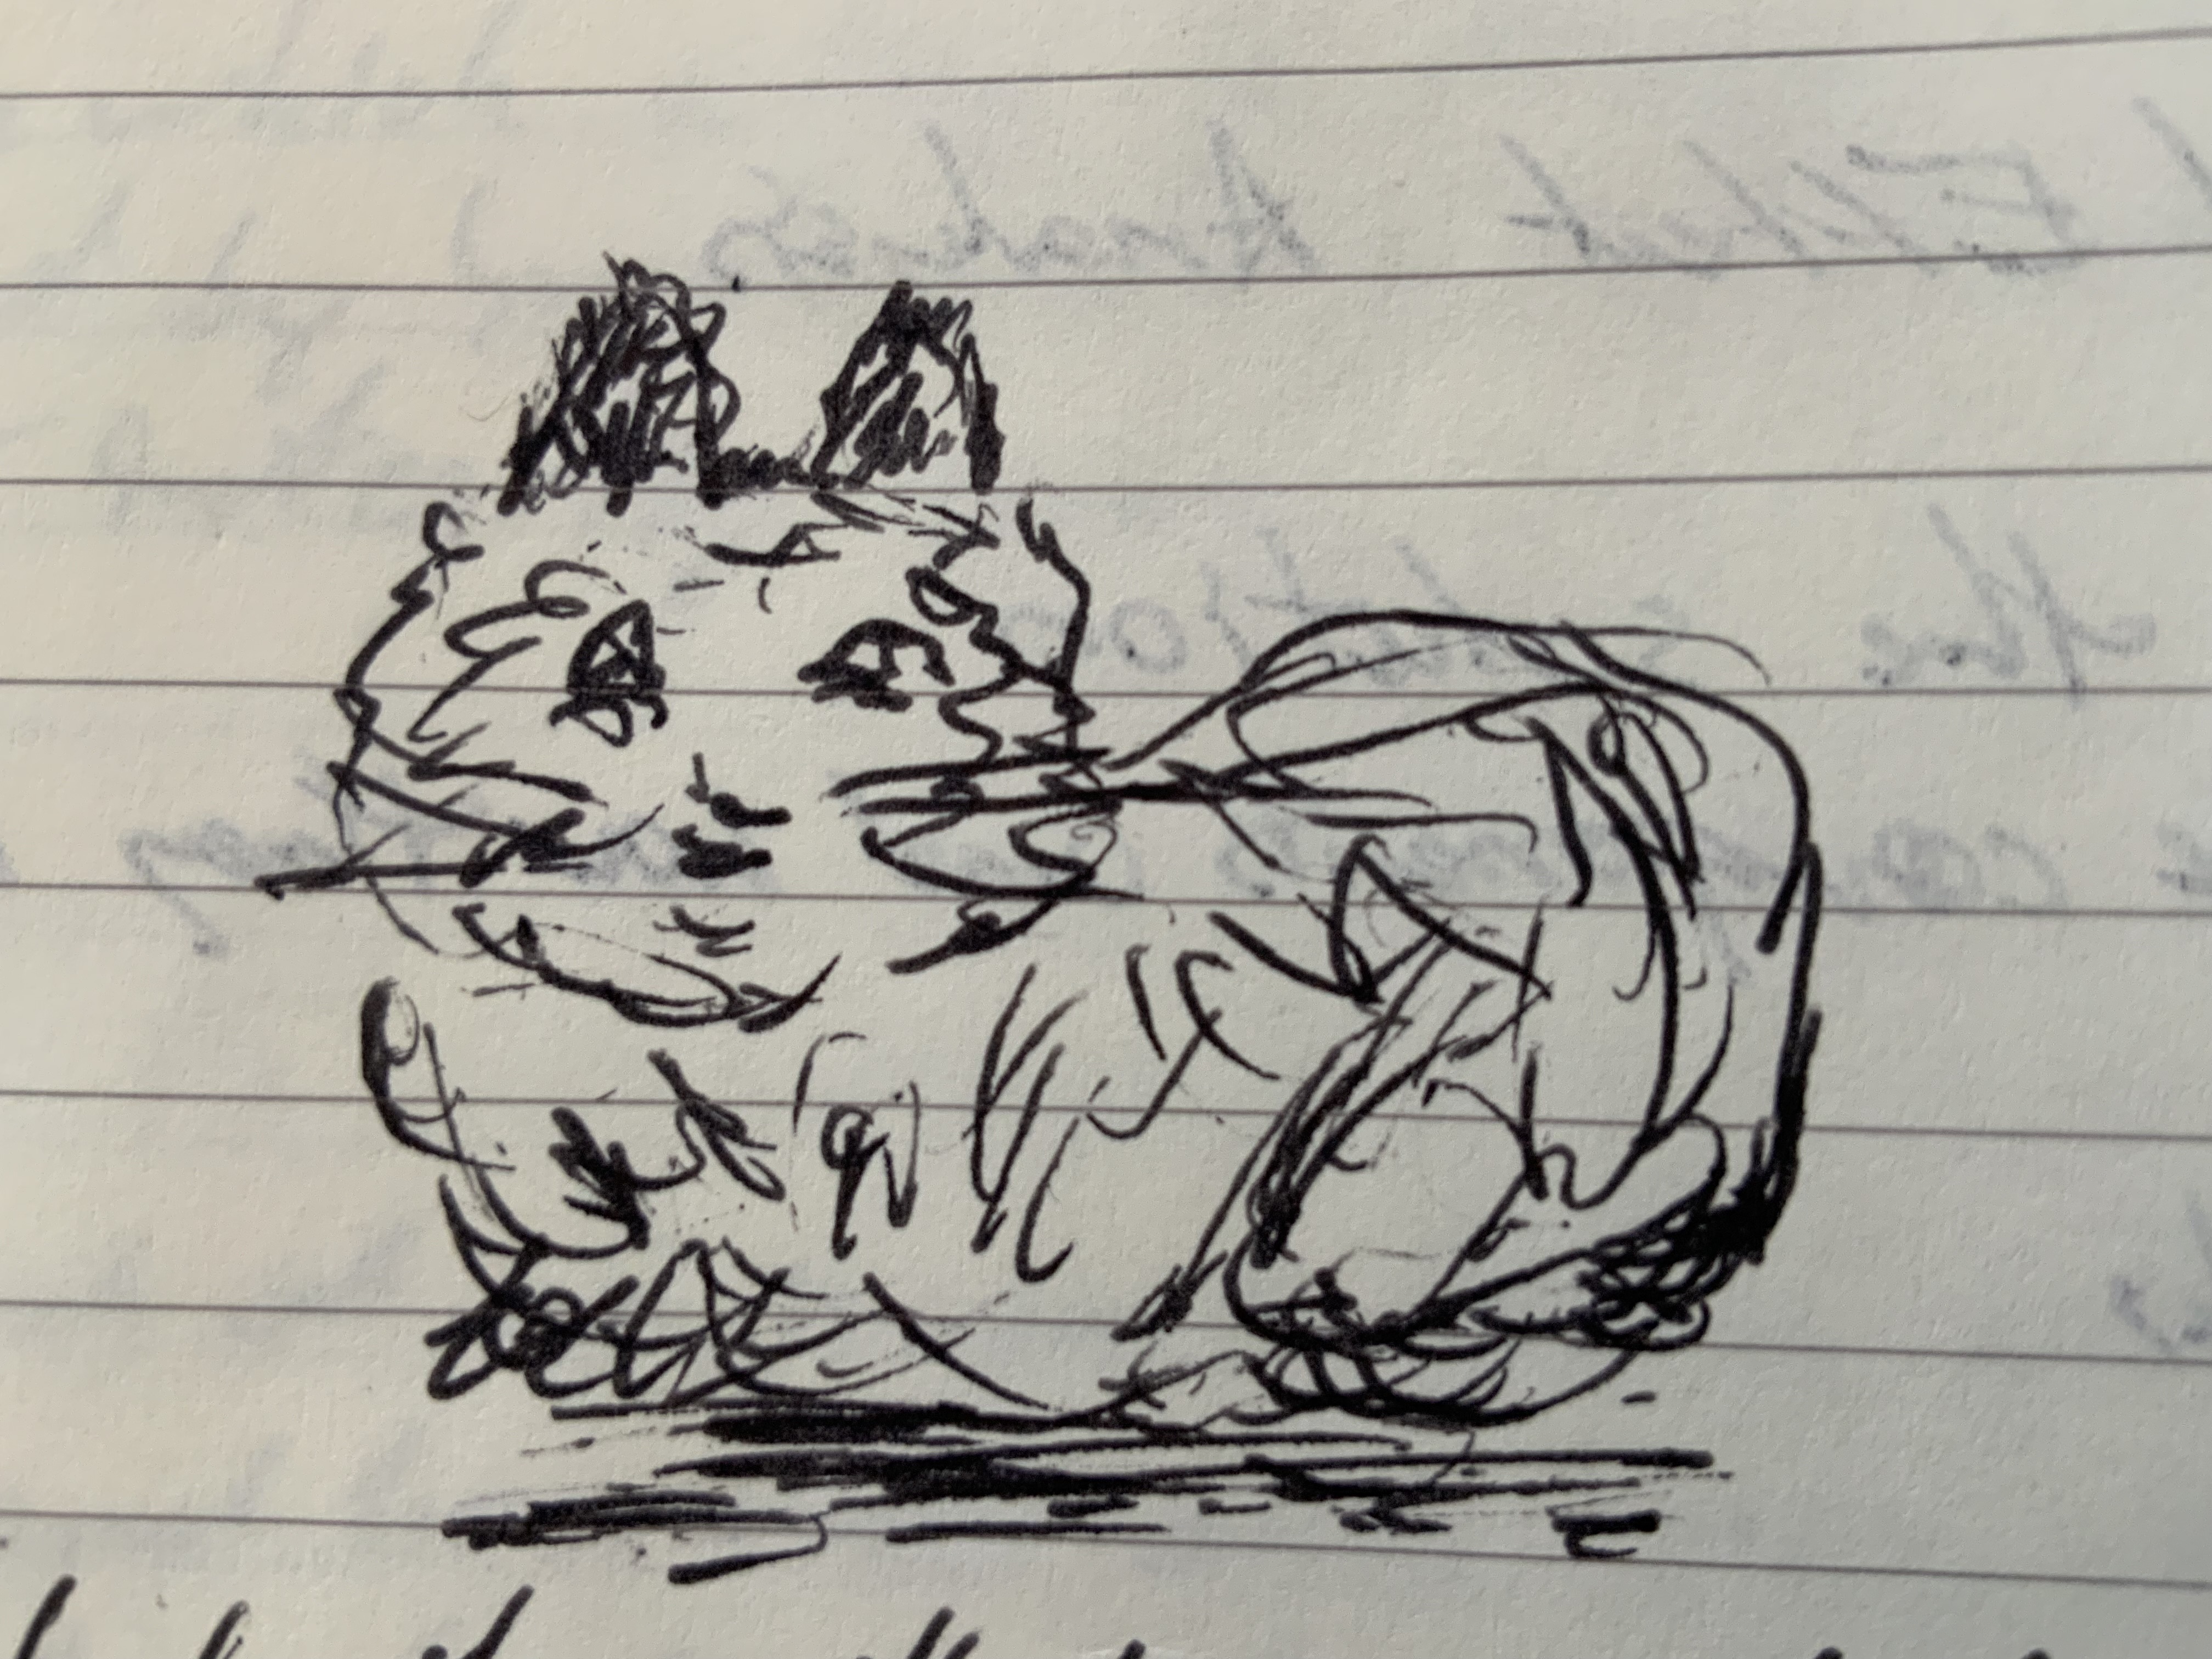 I wrote this by hand before typing it up, and drew a cat. This is the cat.